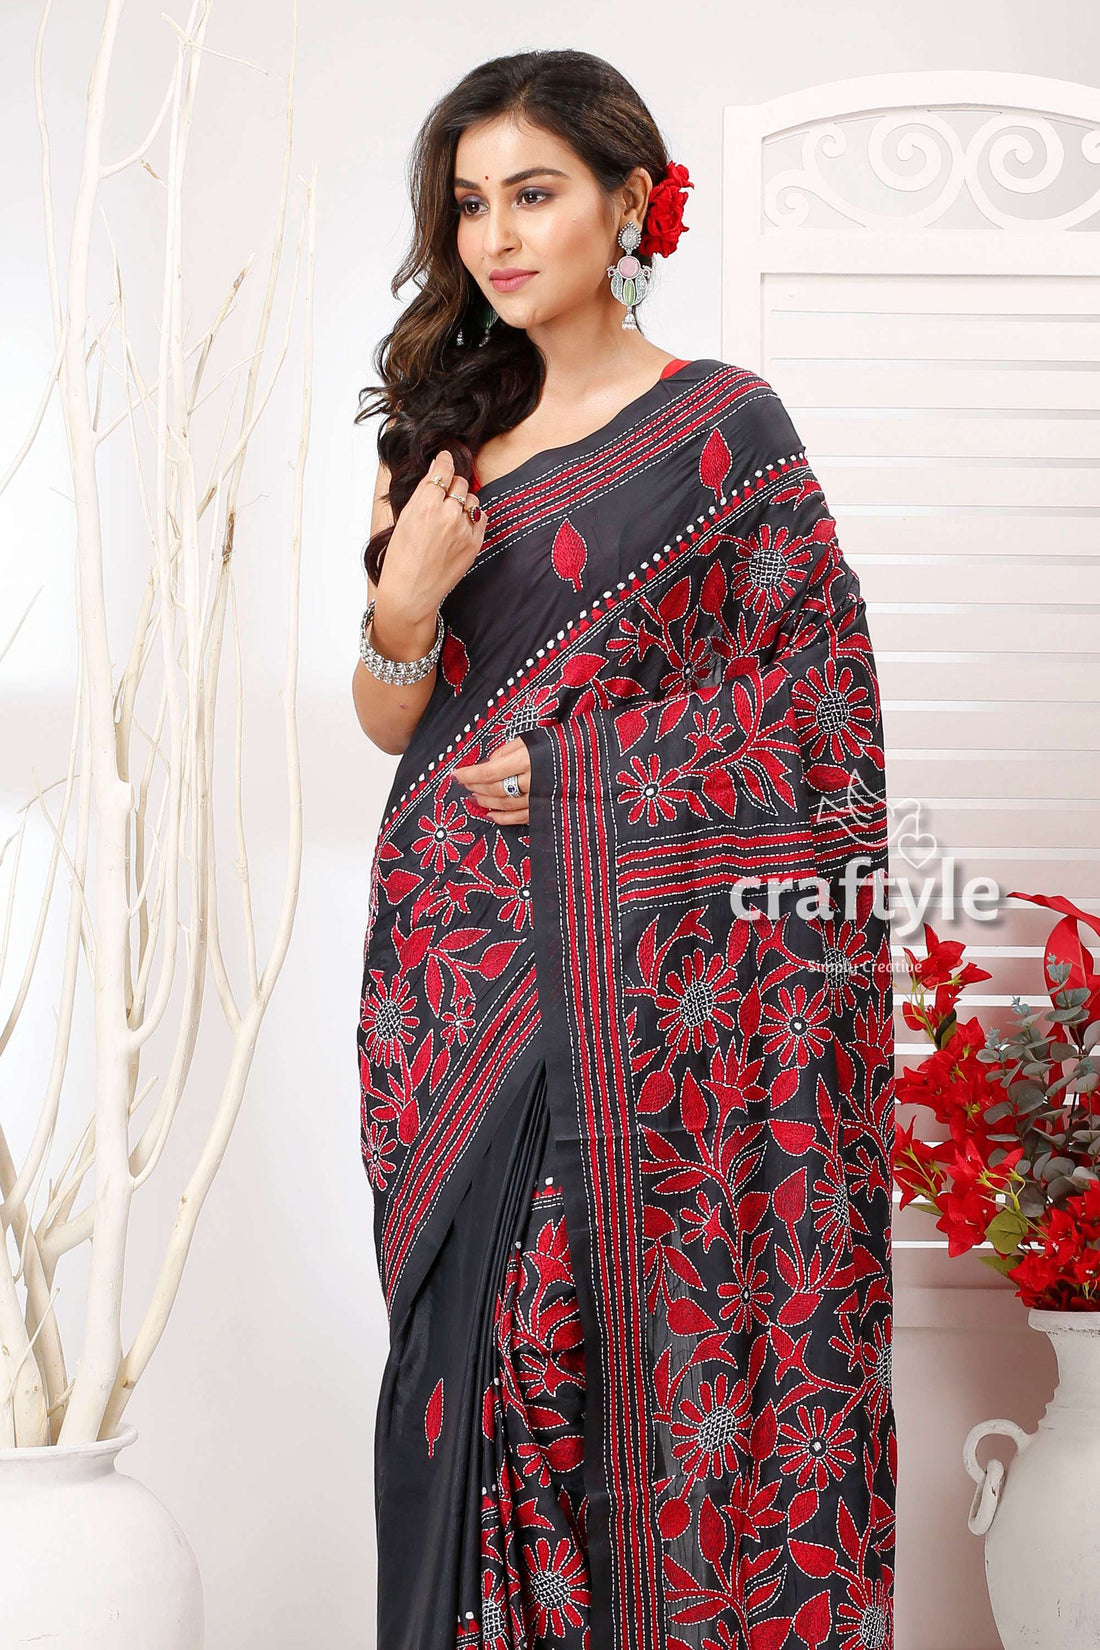 Black and Maroon Floral Exquisite Silk Kantha Embroidery Saree - Craftyle